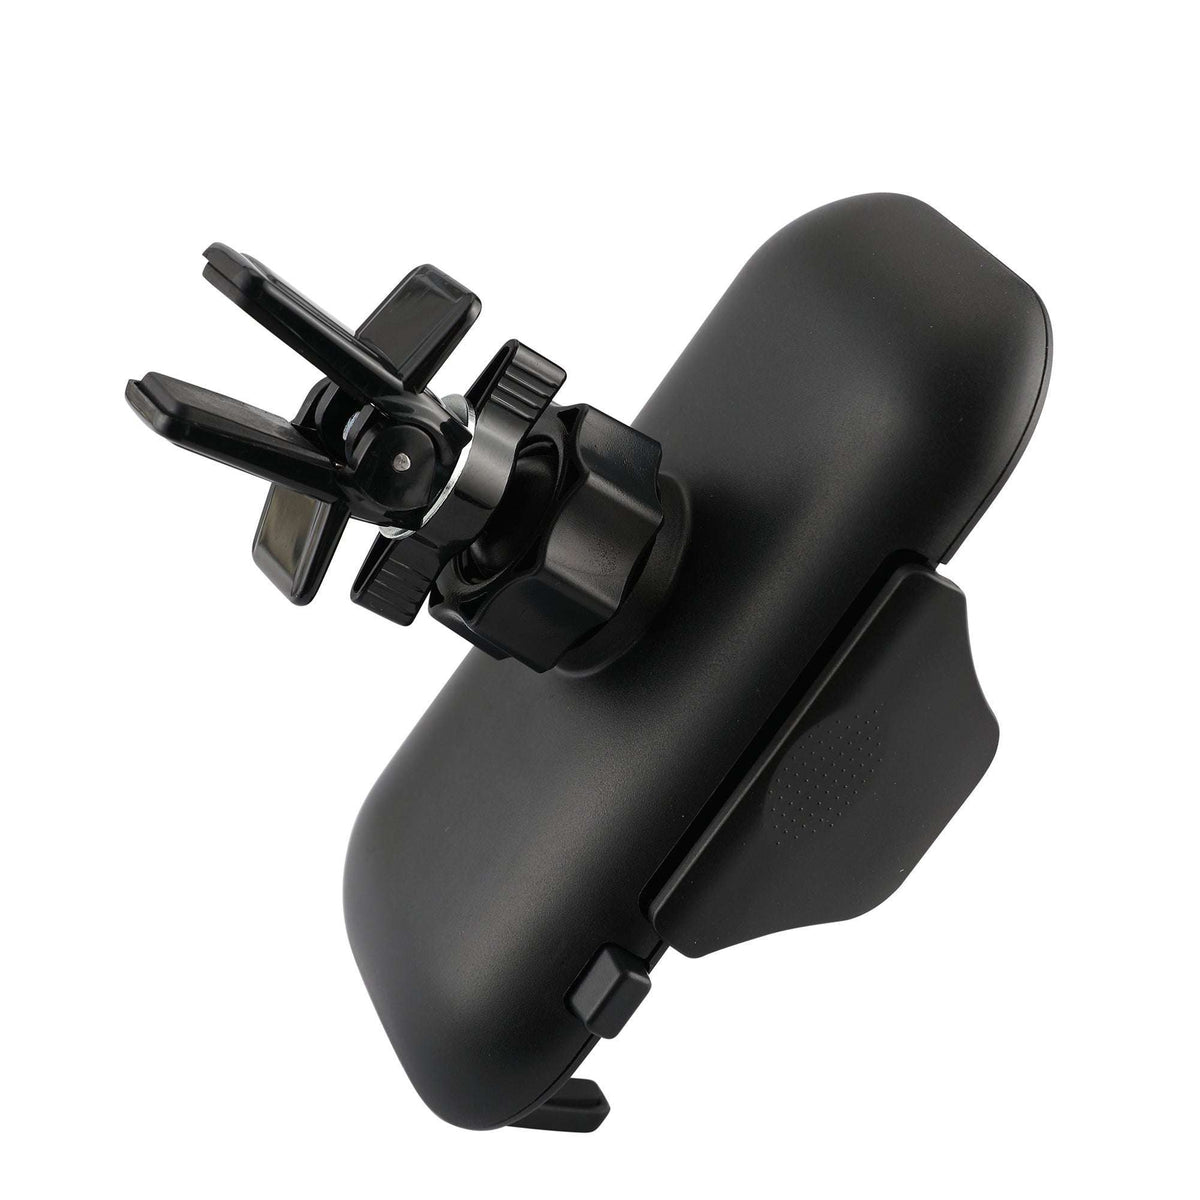 Premium Cradle-Type Car Mount with Air Vent Clip, Adjustable Side Jaws & Silicone Pad